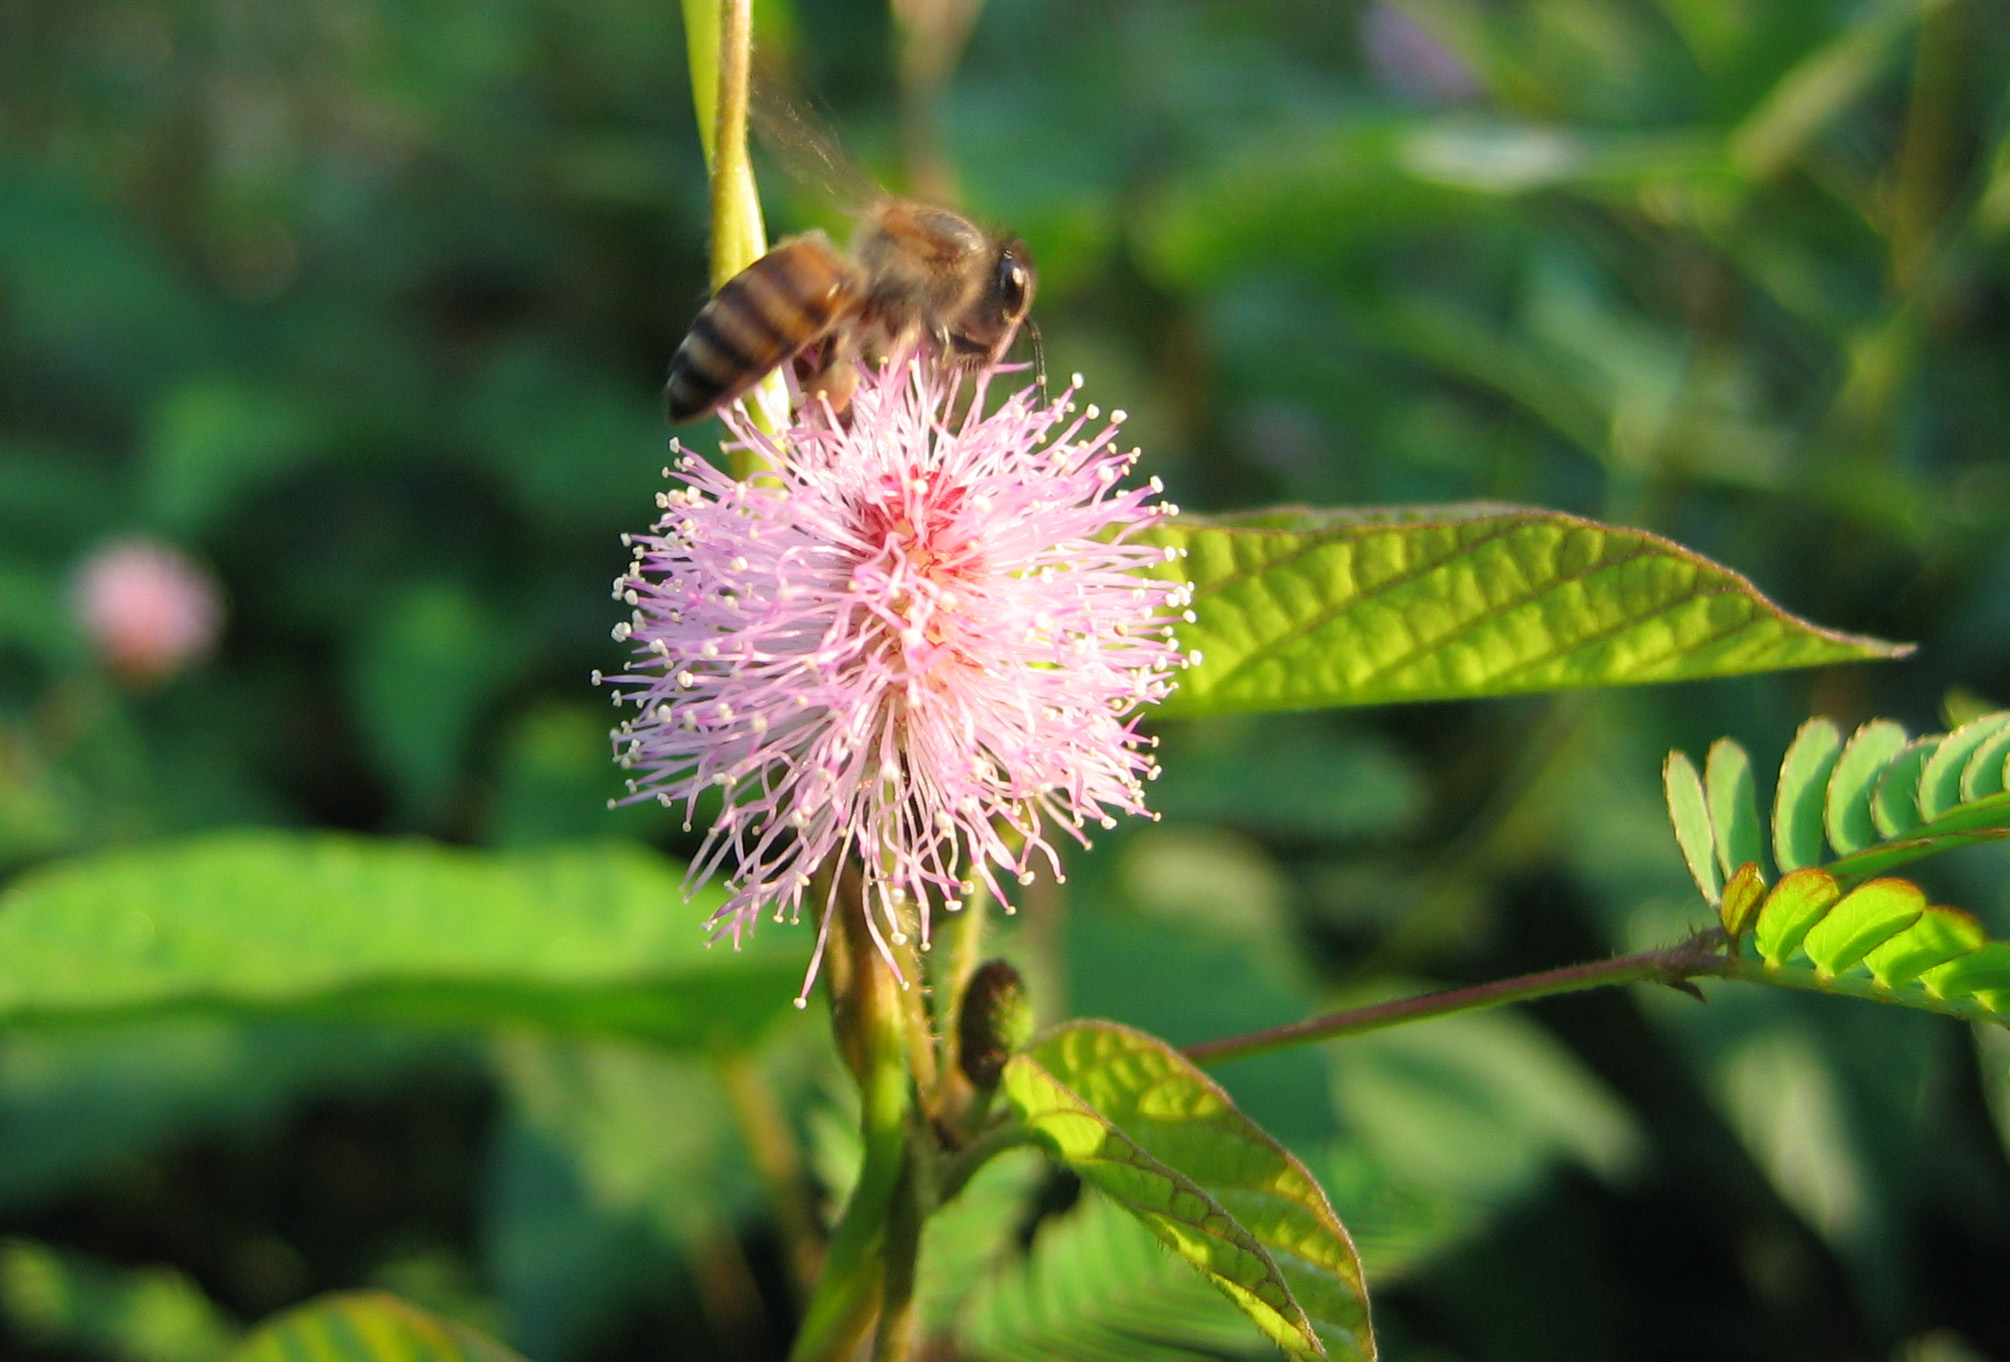 File:Bee in touch me not flower.jpg - Wikimedia Commons